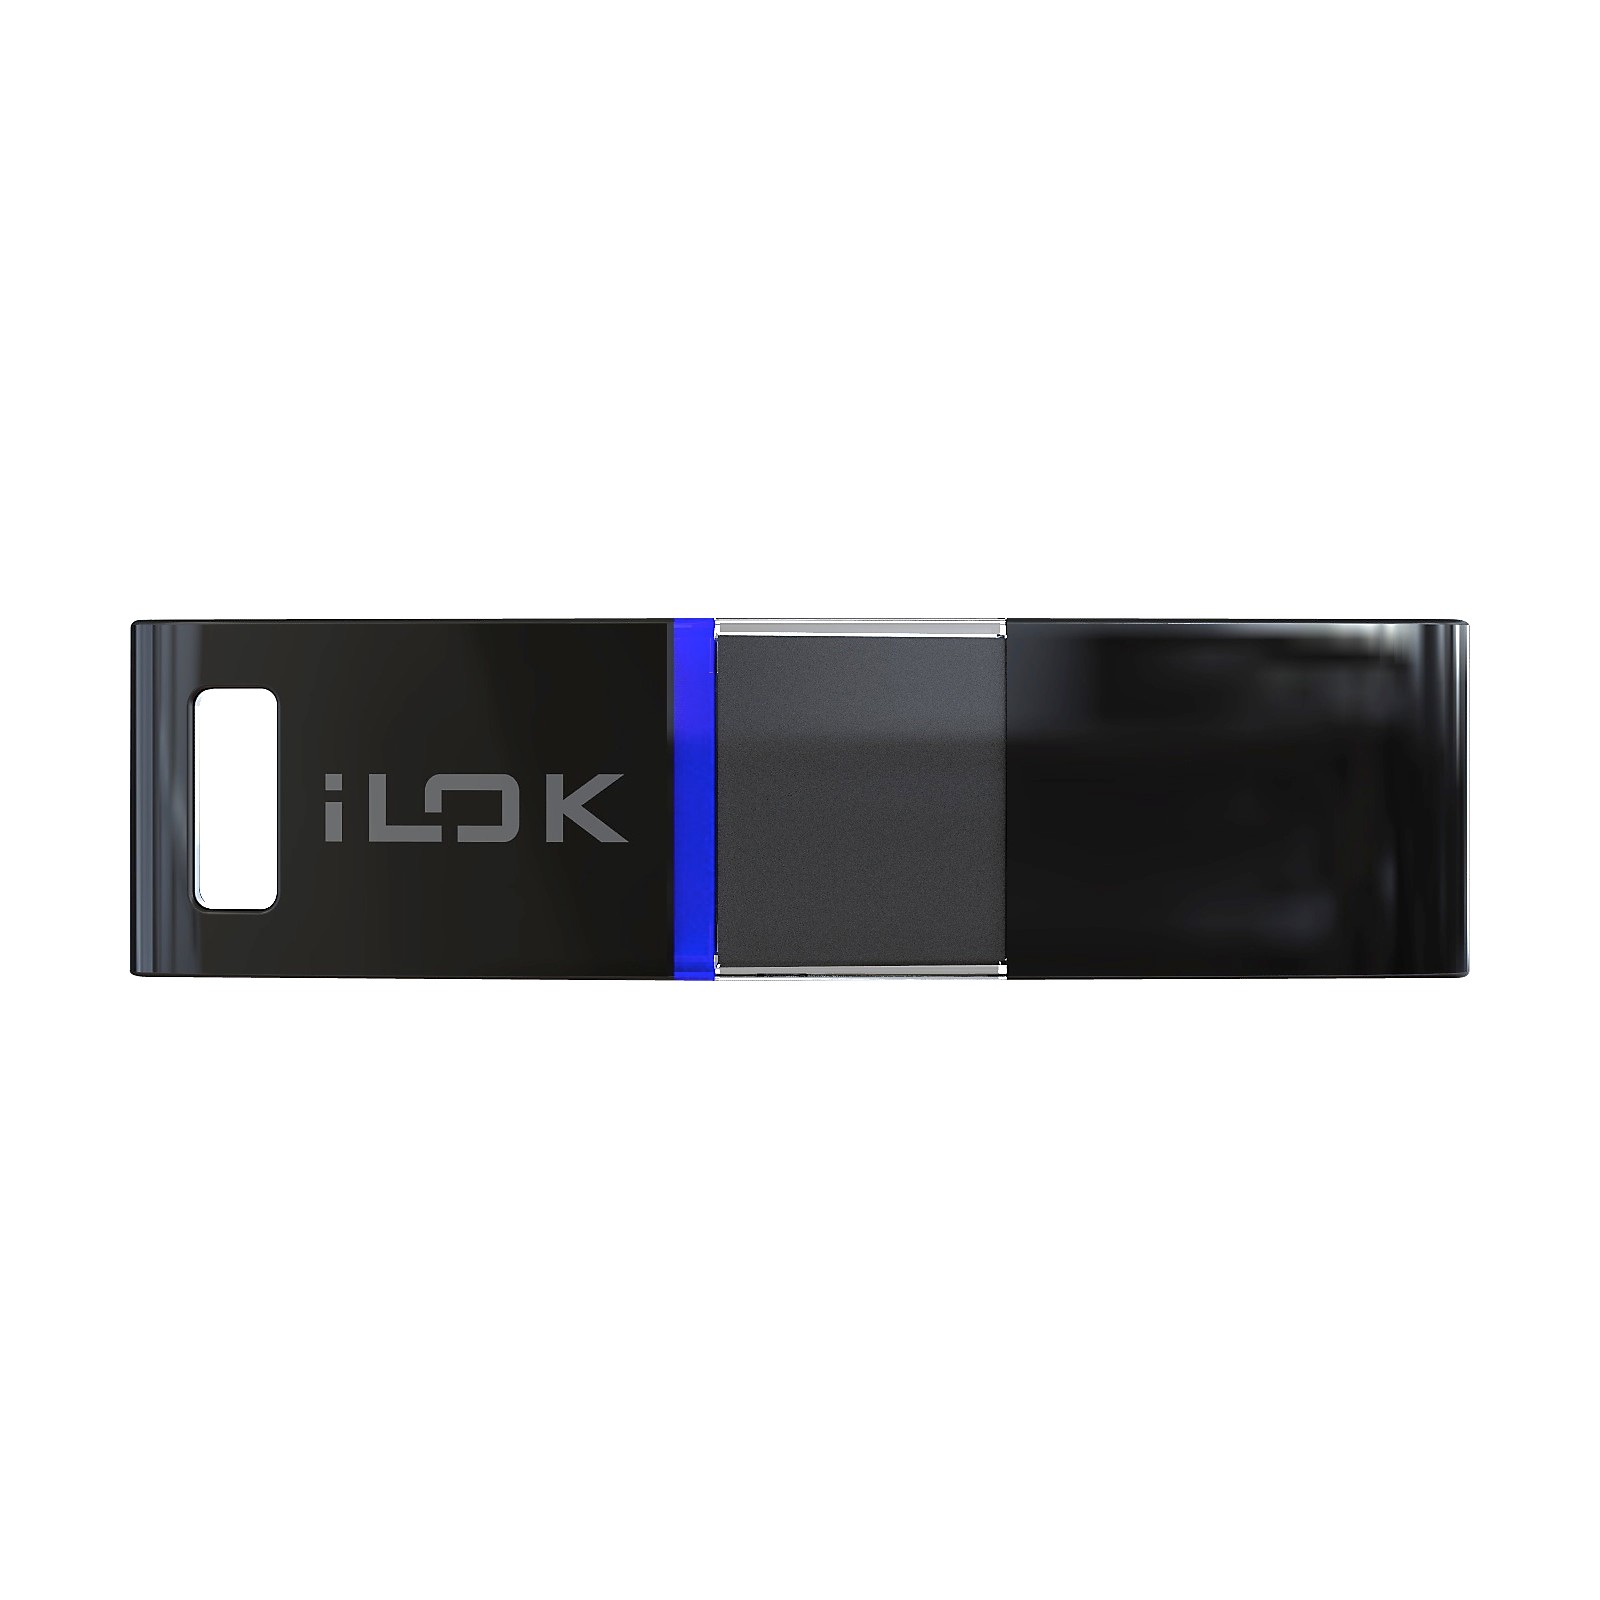 pace ilok manager